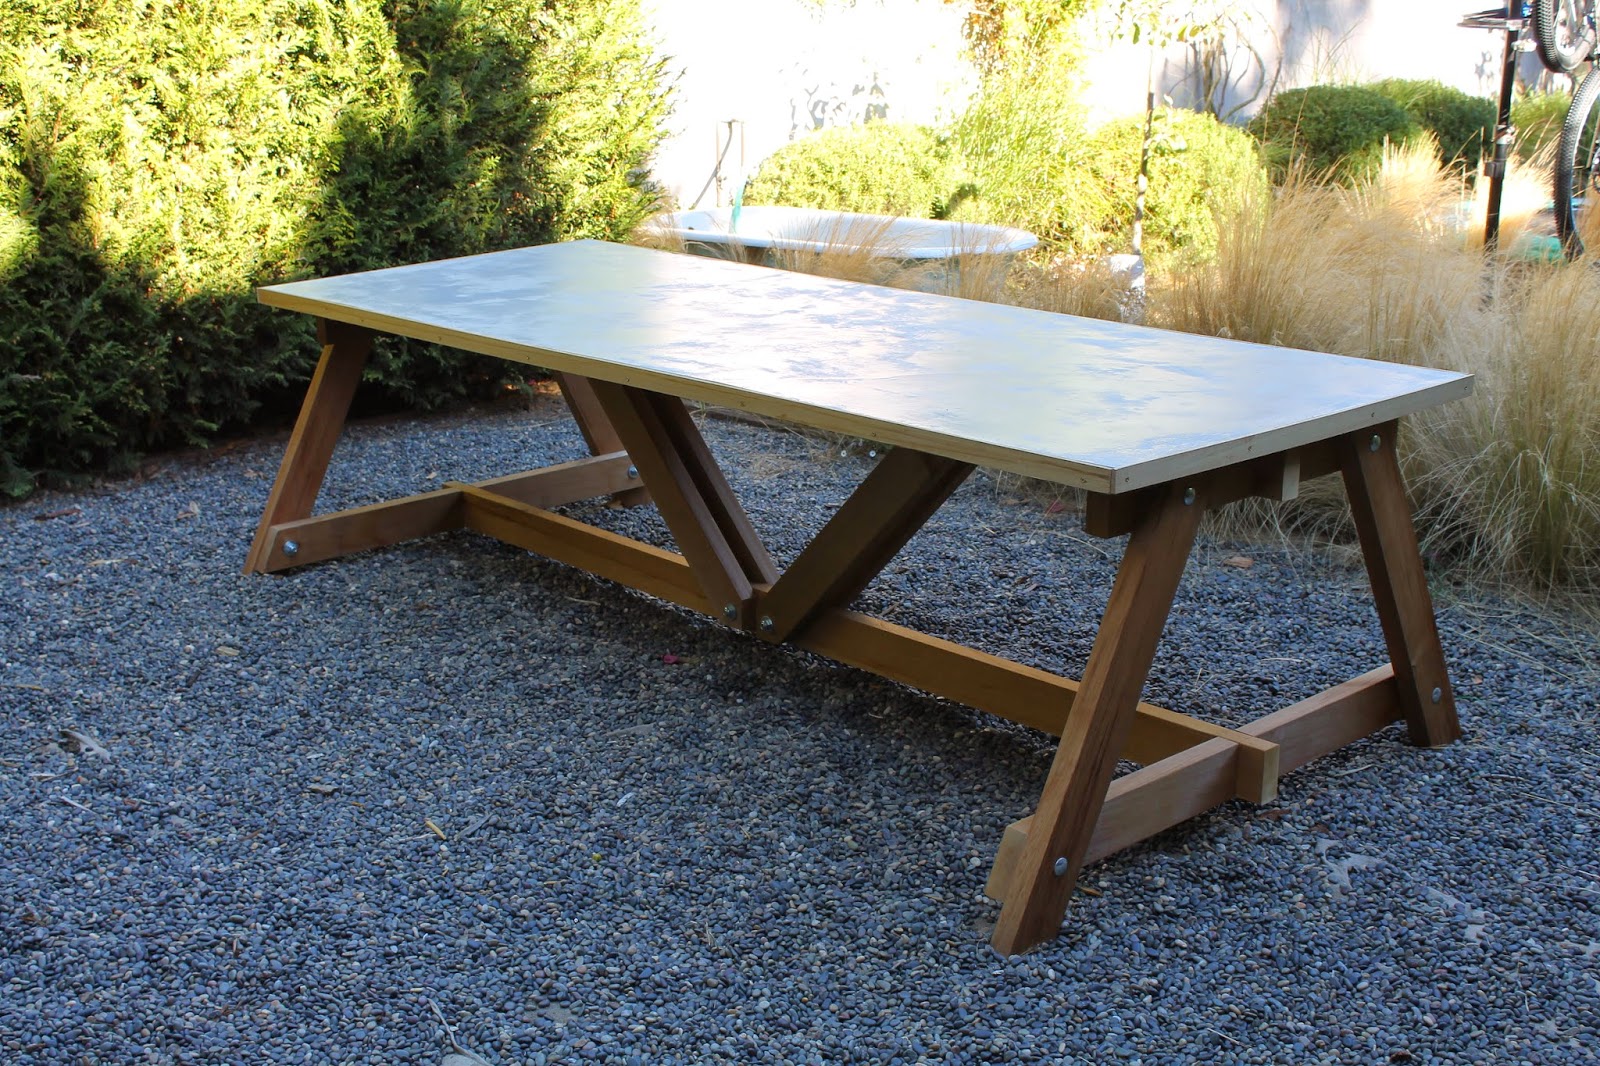 The Shingled House: How to Build a Picnic Table: Part Two